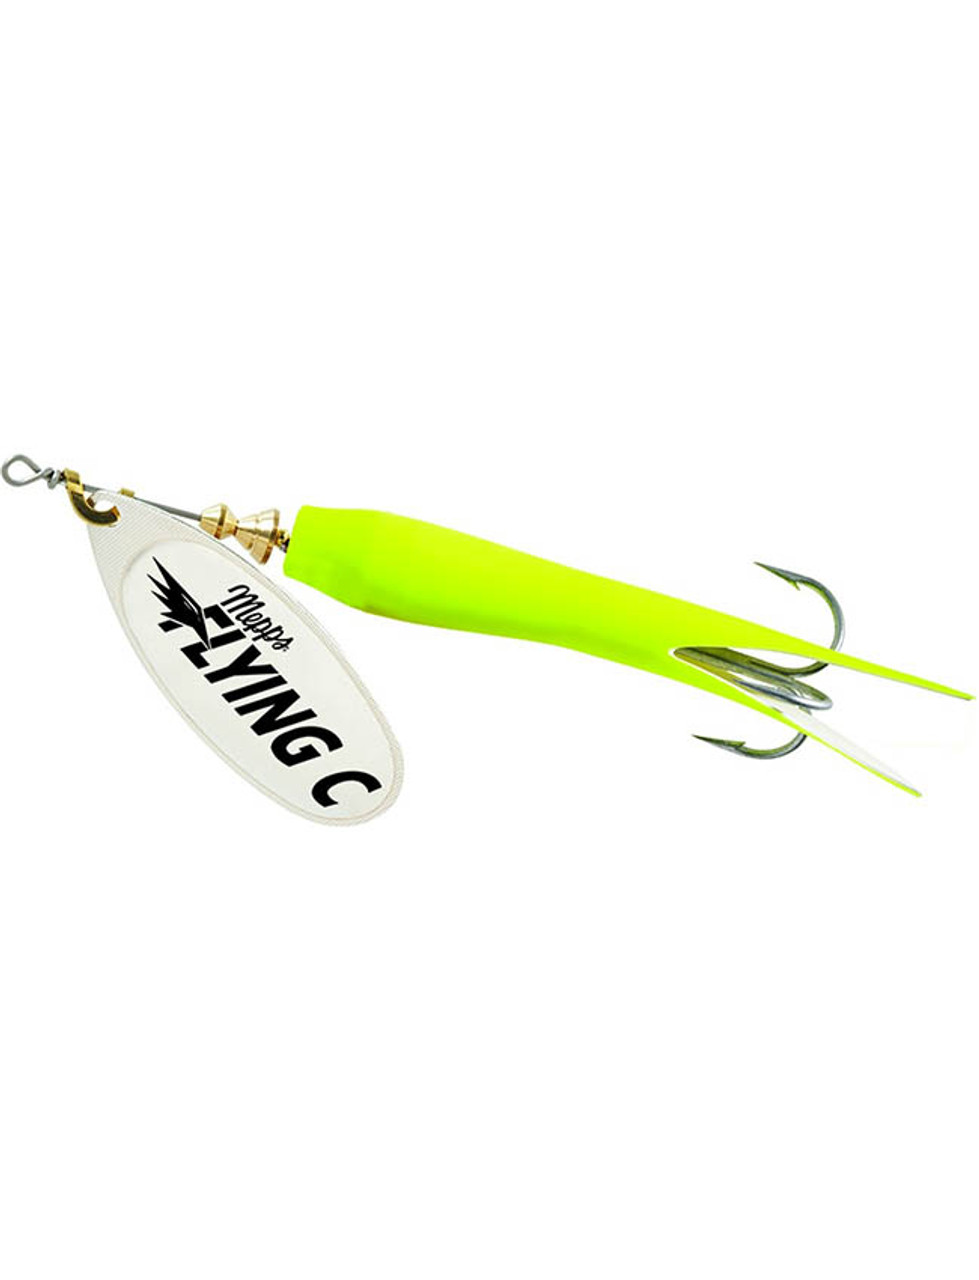 Mepps Flying C Lure - Hot Pink Sleeve & Gold Blade